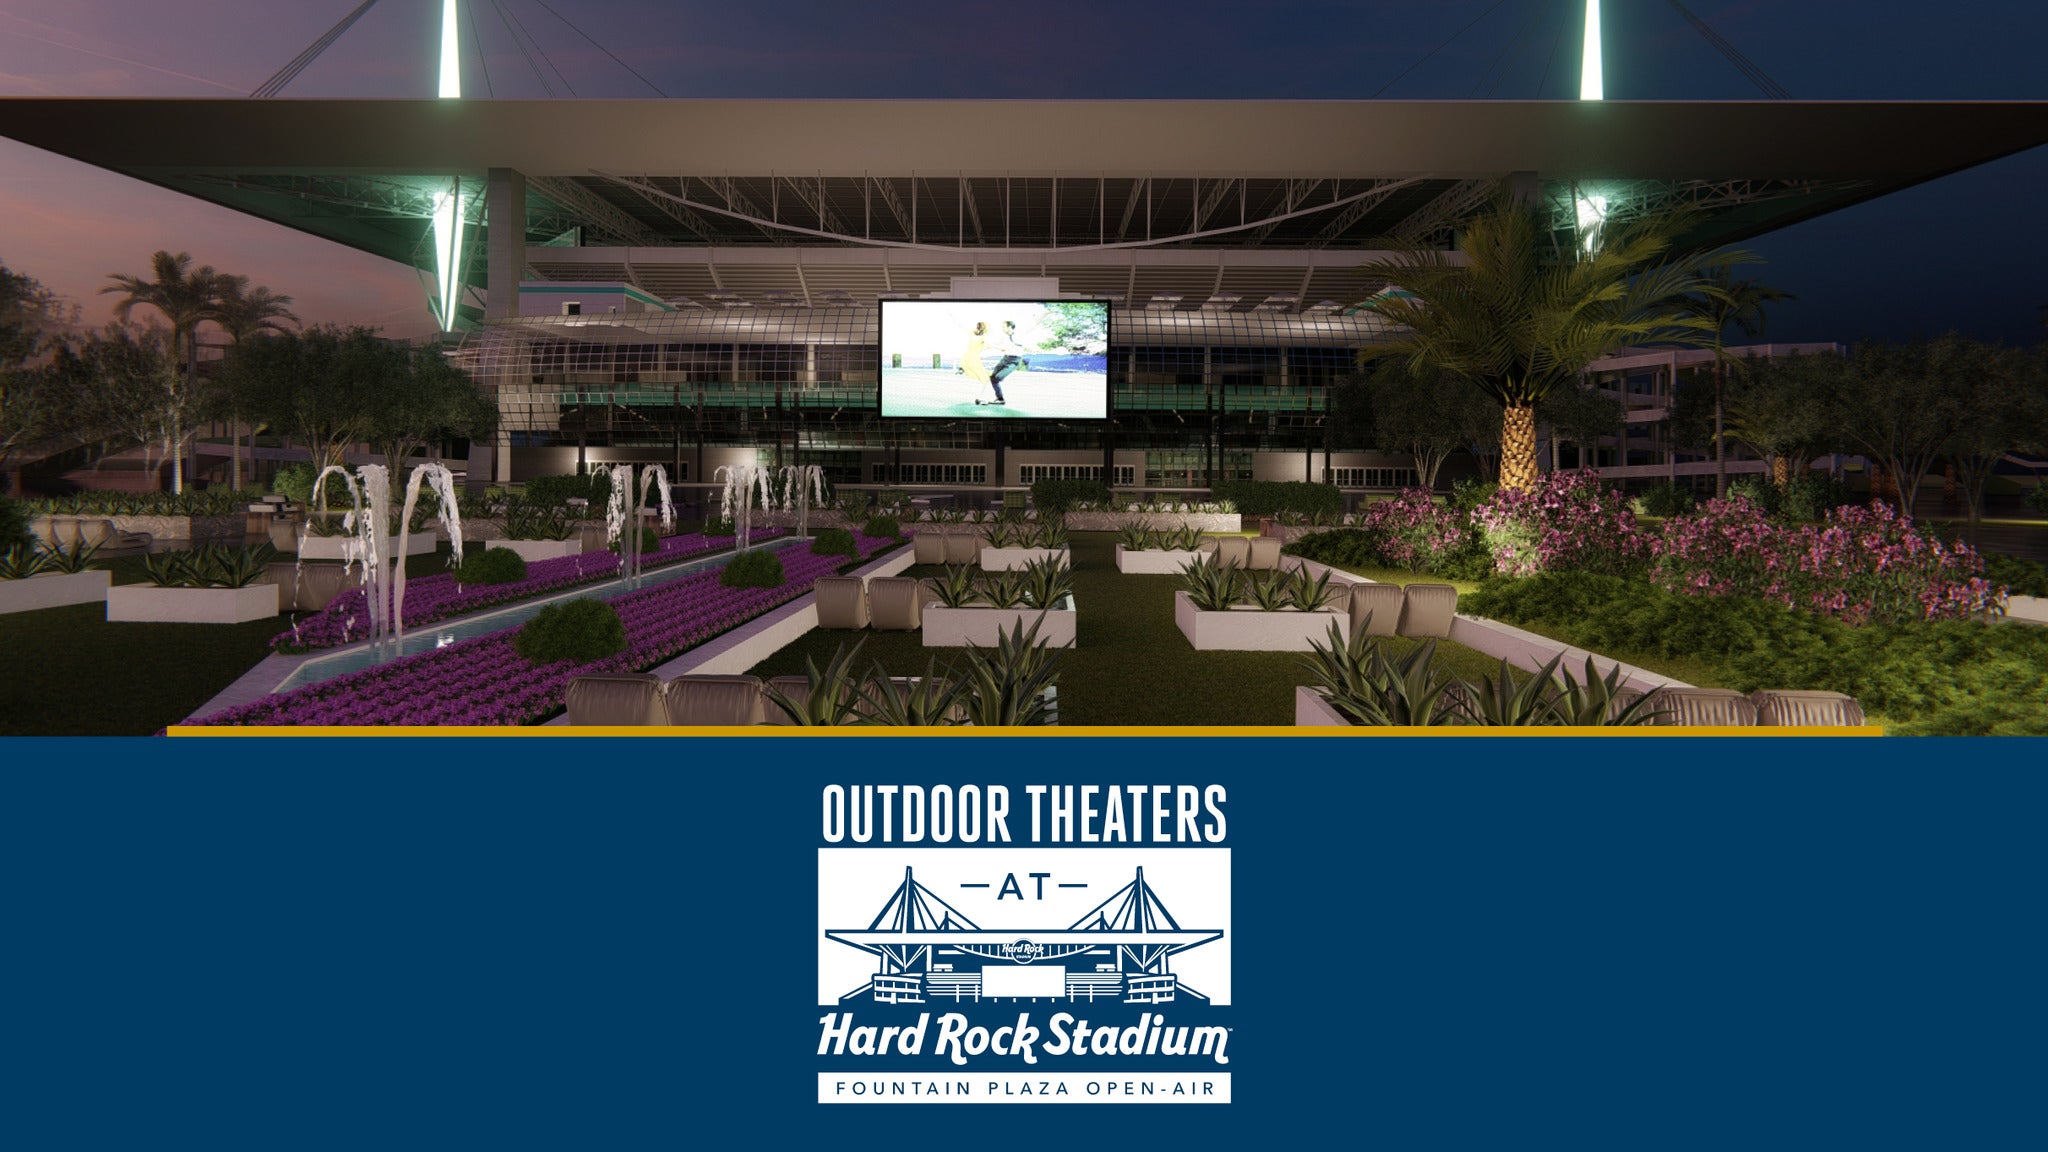 Fountain Plaza Theater:transformers The Last Knight in Miami promo photo for Hard Rock Stadium Members presale offer code